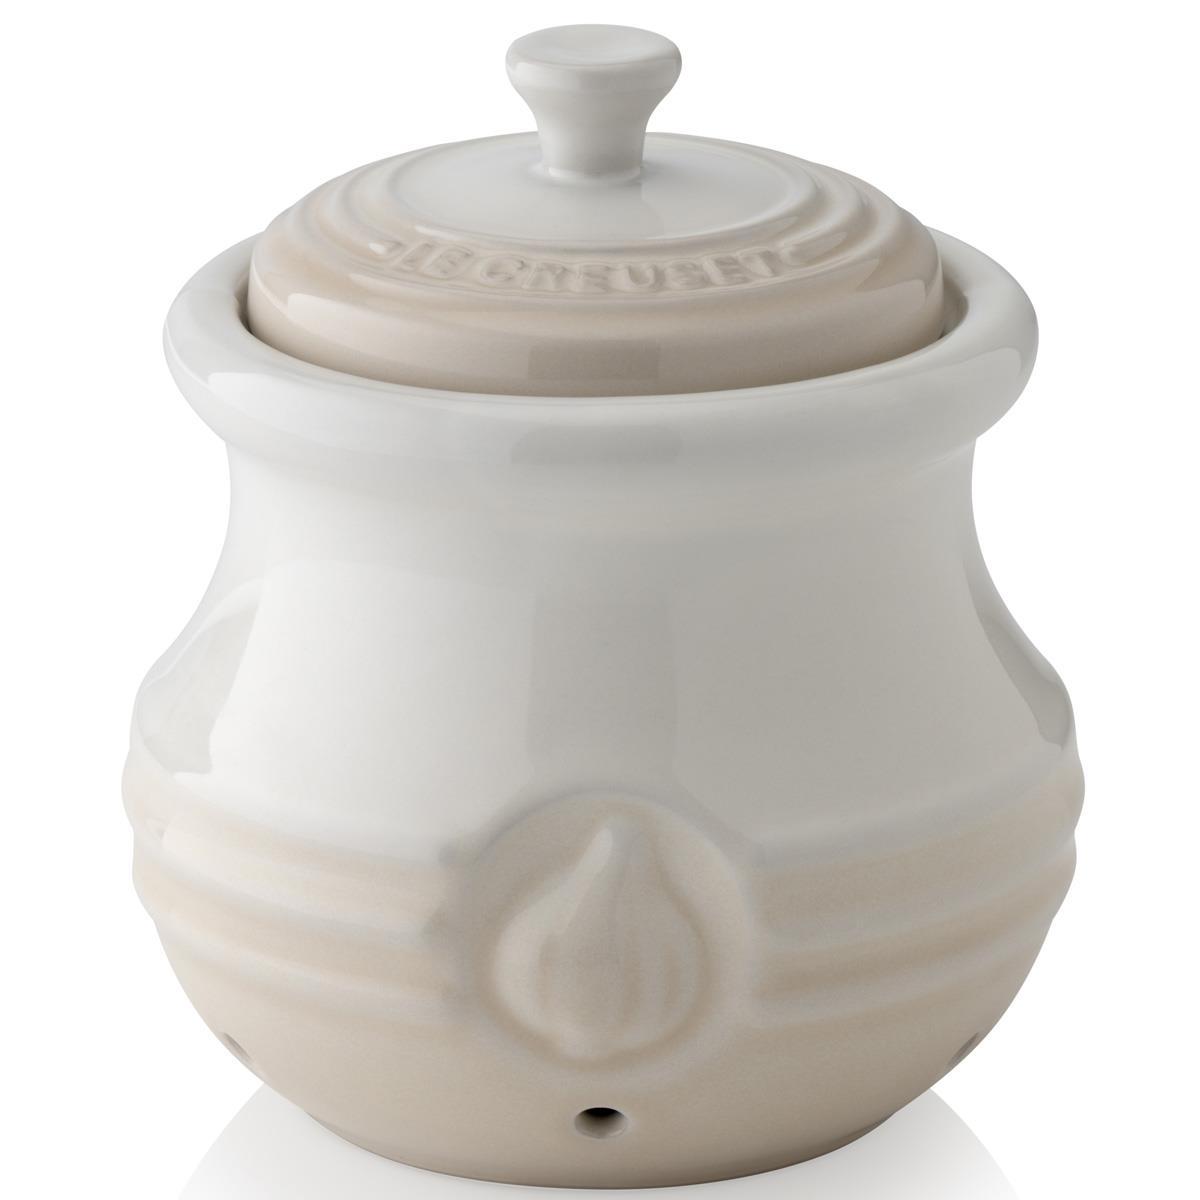 What is the purpose of the Le Creuset garlic keeper?